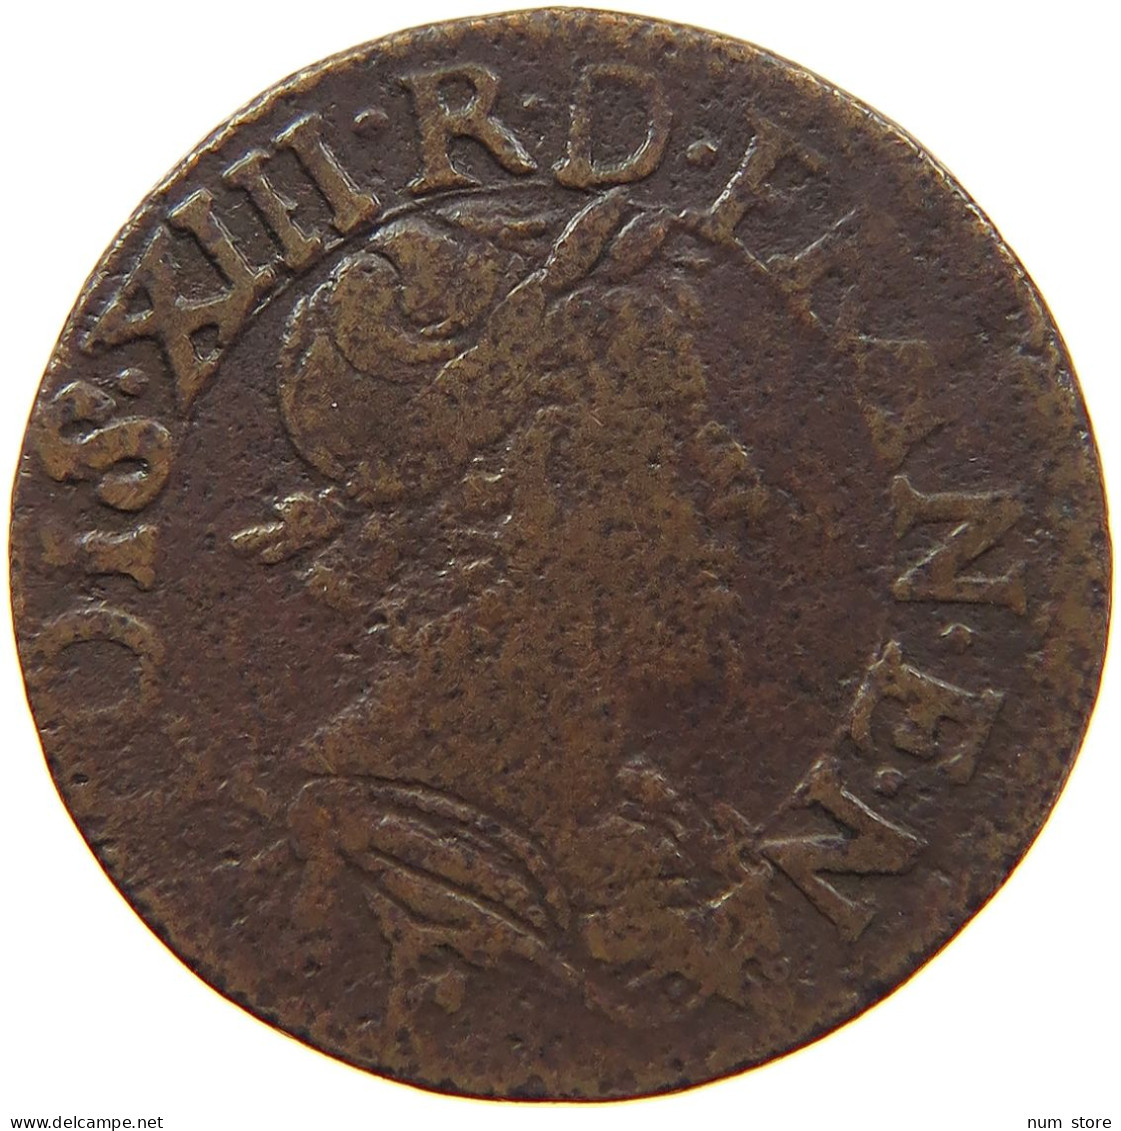 FRANCE DOUBLE TOURNOIS 1637 LOUIS XIII. (1610–1643) #s019 0257 - 1610-1643 Louis XIII The Just